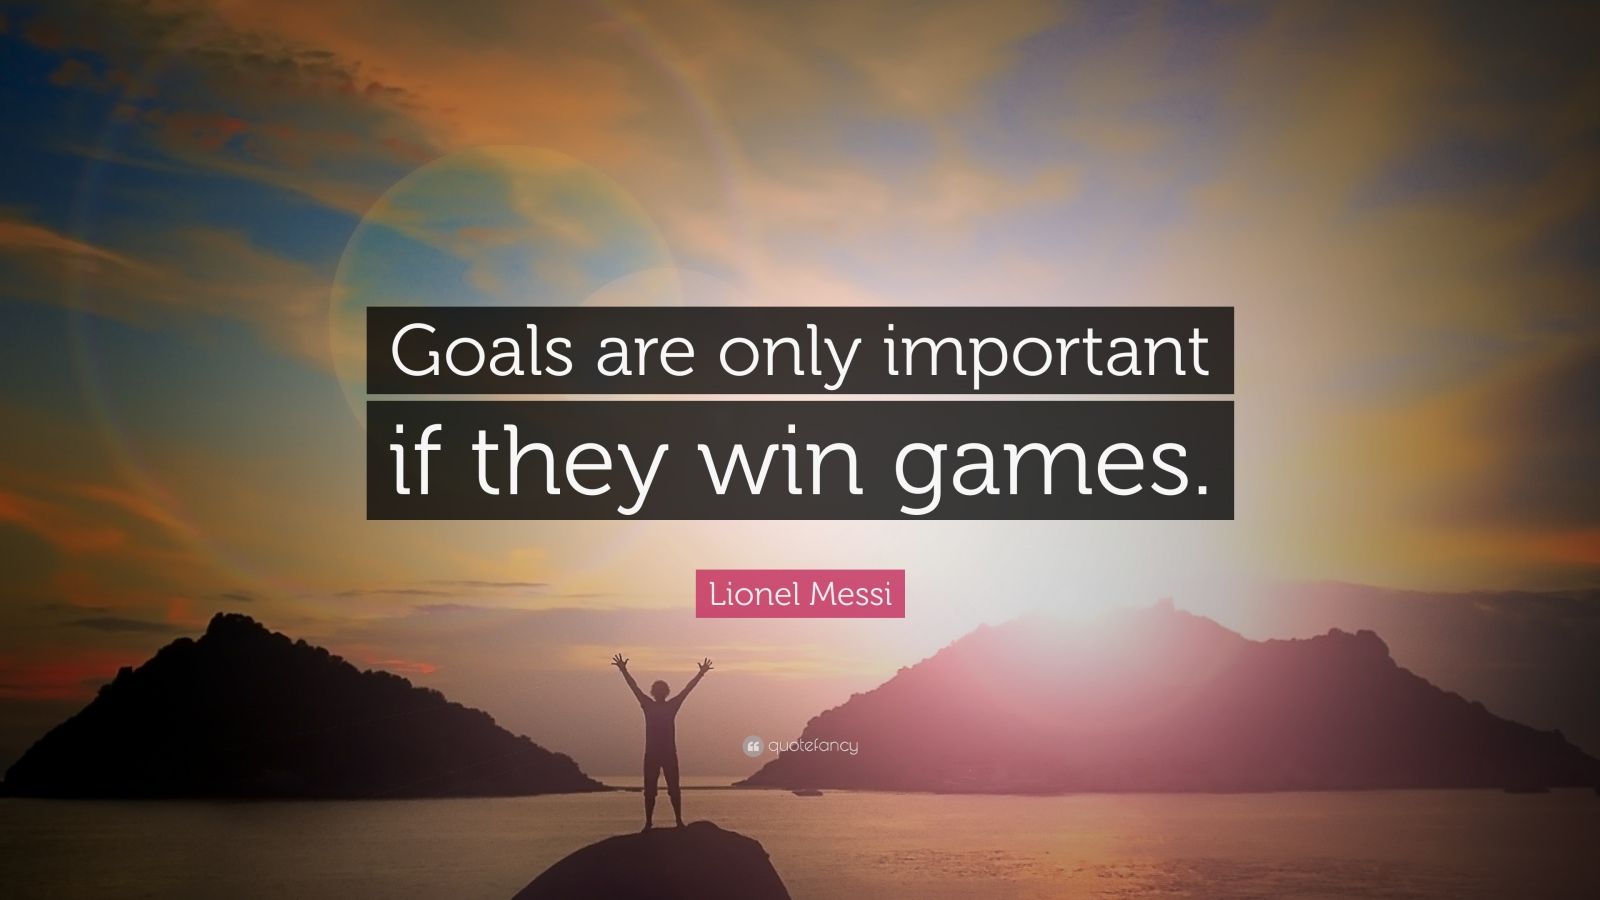 Lionel Messi Quotes (67 wallpapers) - Quotefancy